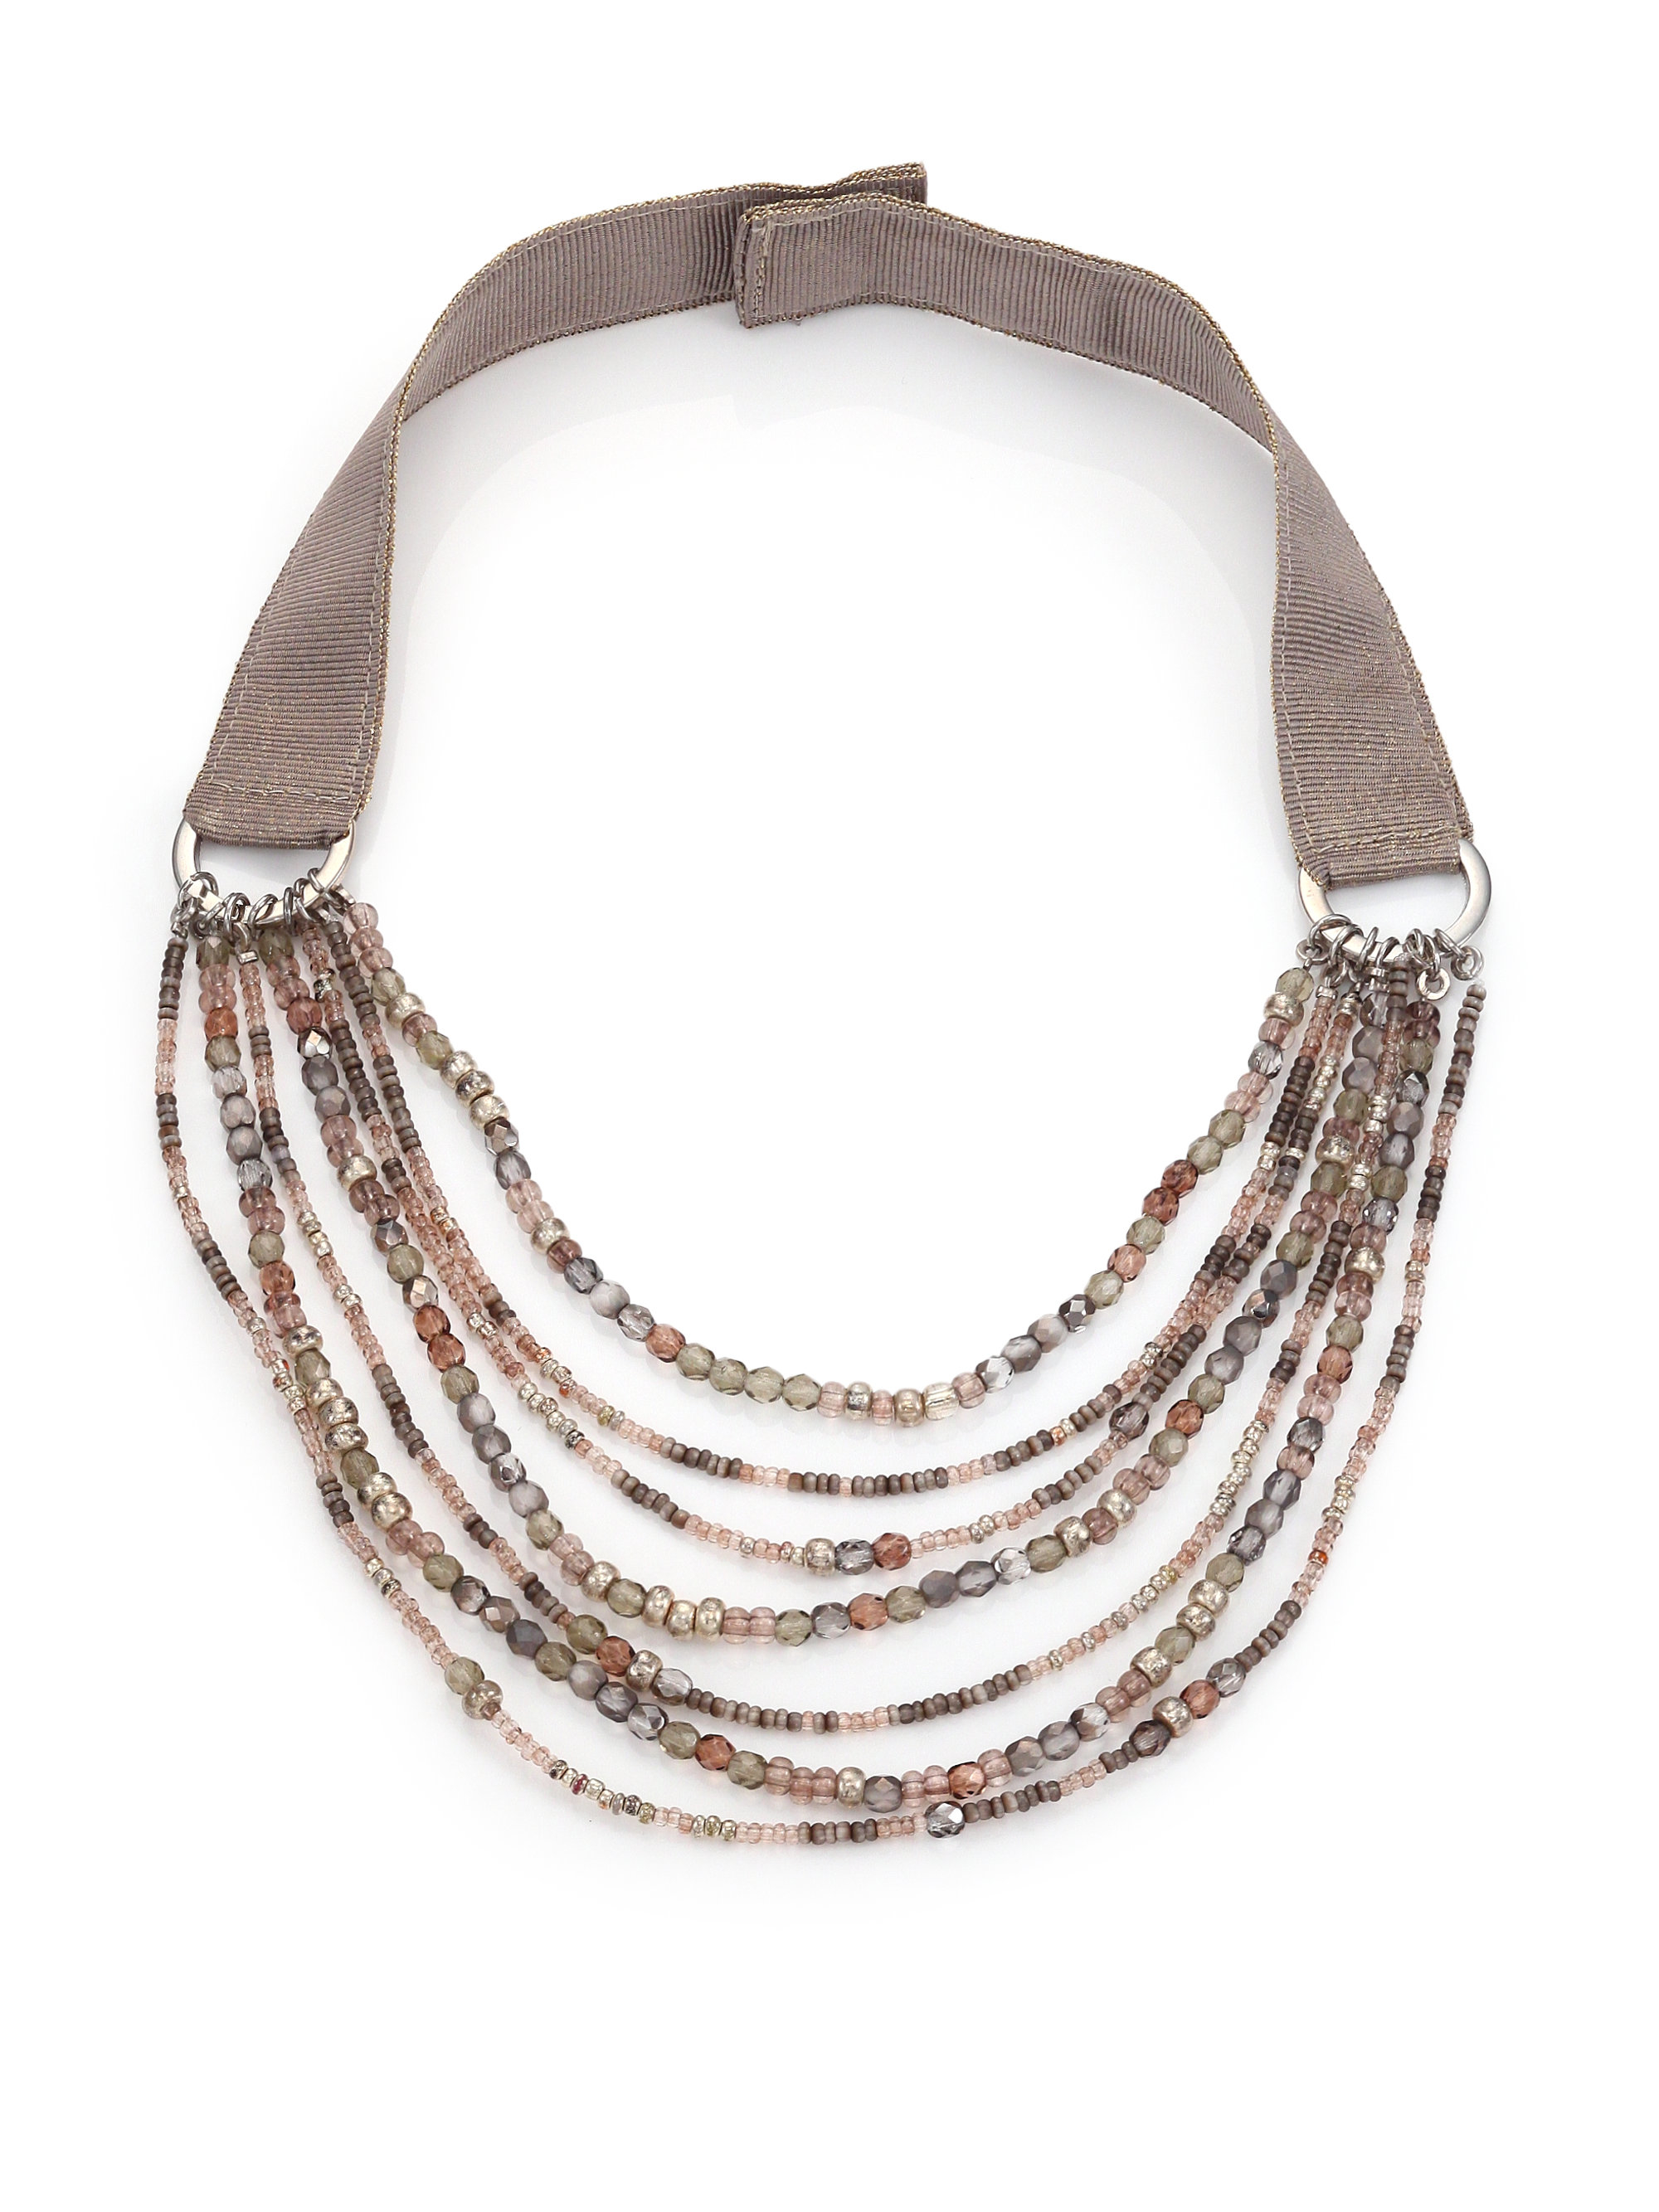 Peserico Mutlistrand Beadaed Necklace in Beige (Natural) - Lyst